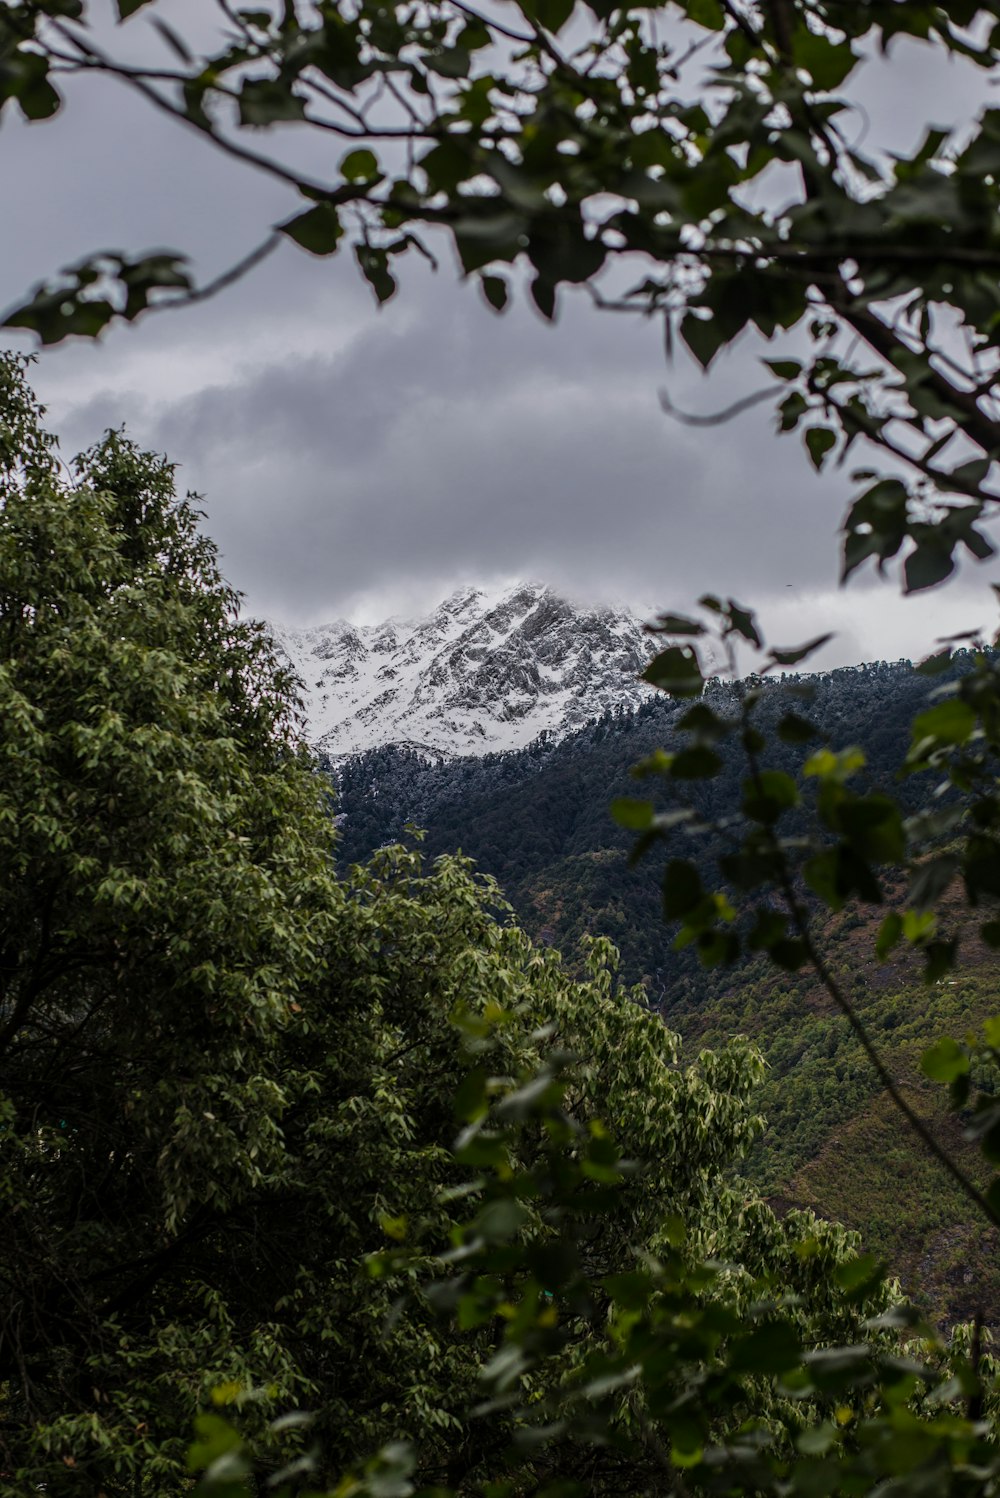 a view of a snow capped mountain through some trees